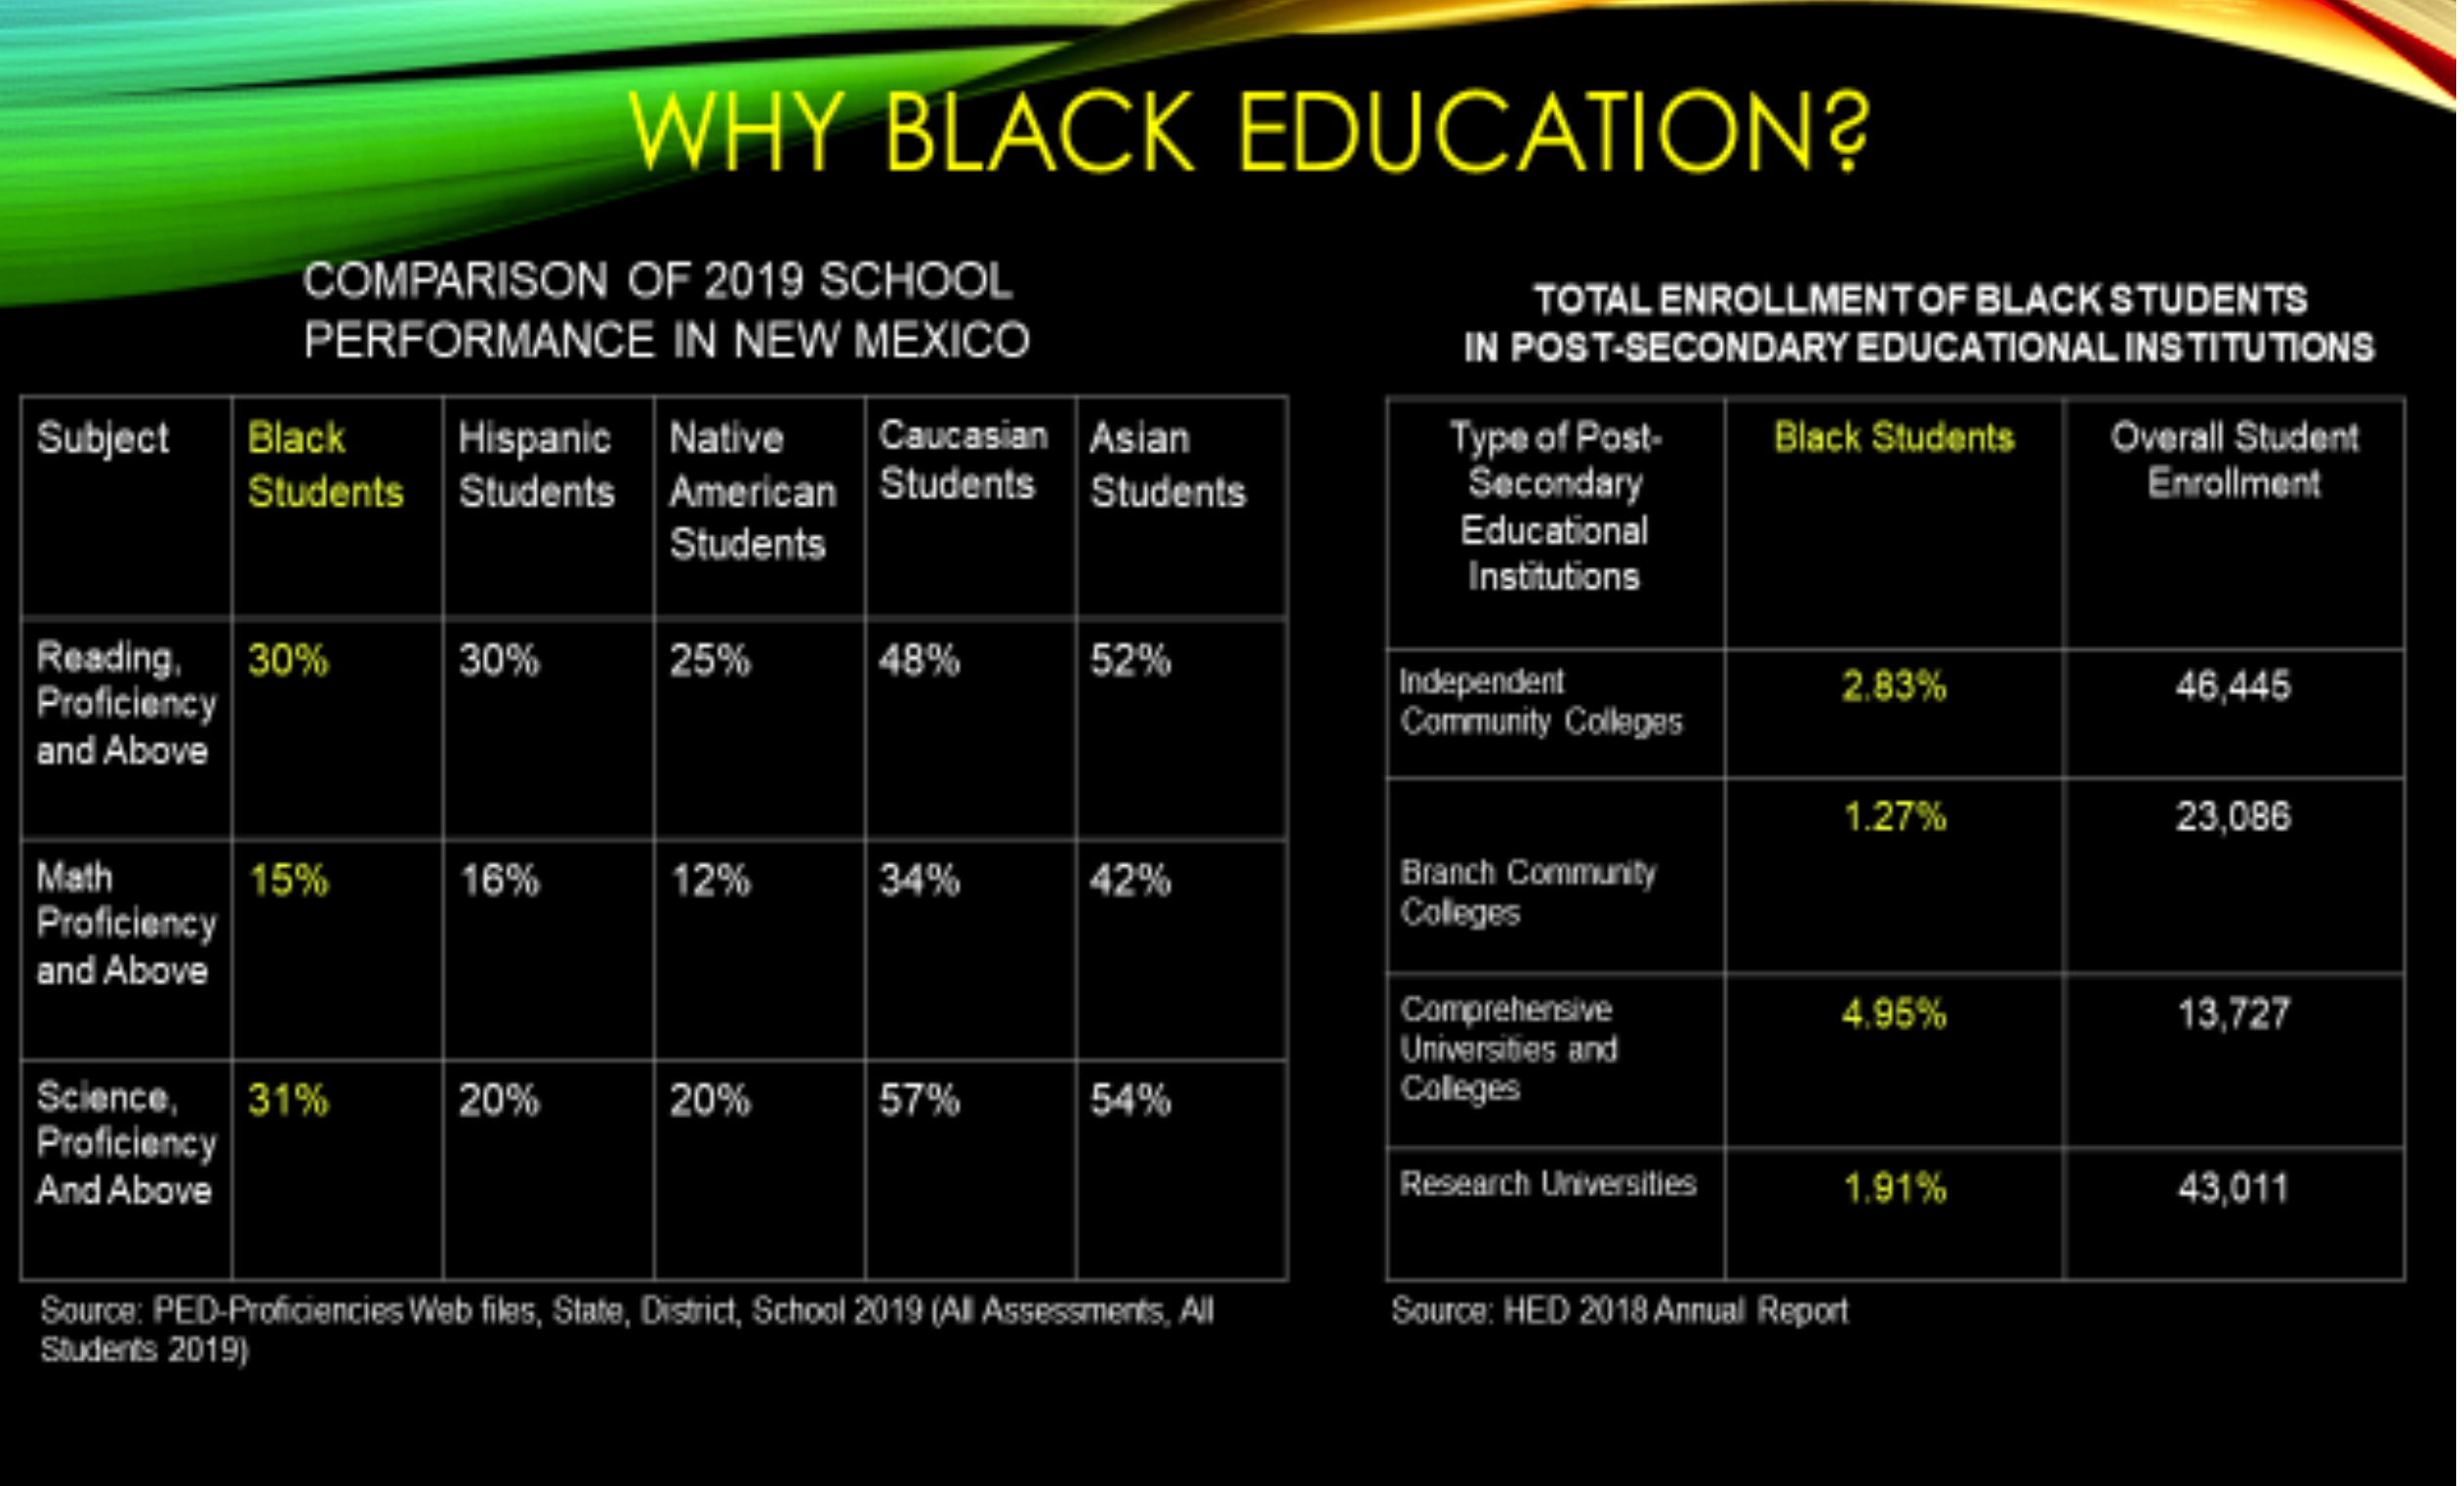 Why Black education infographic